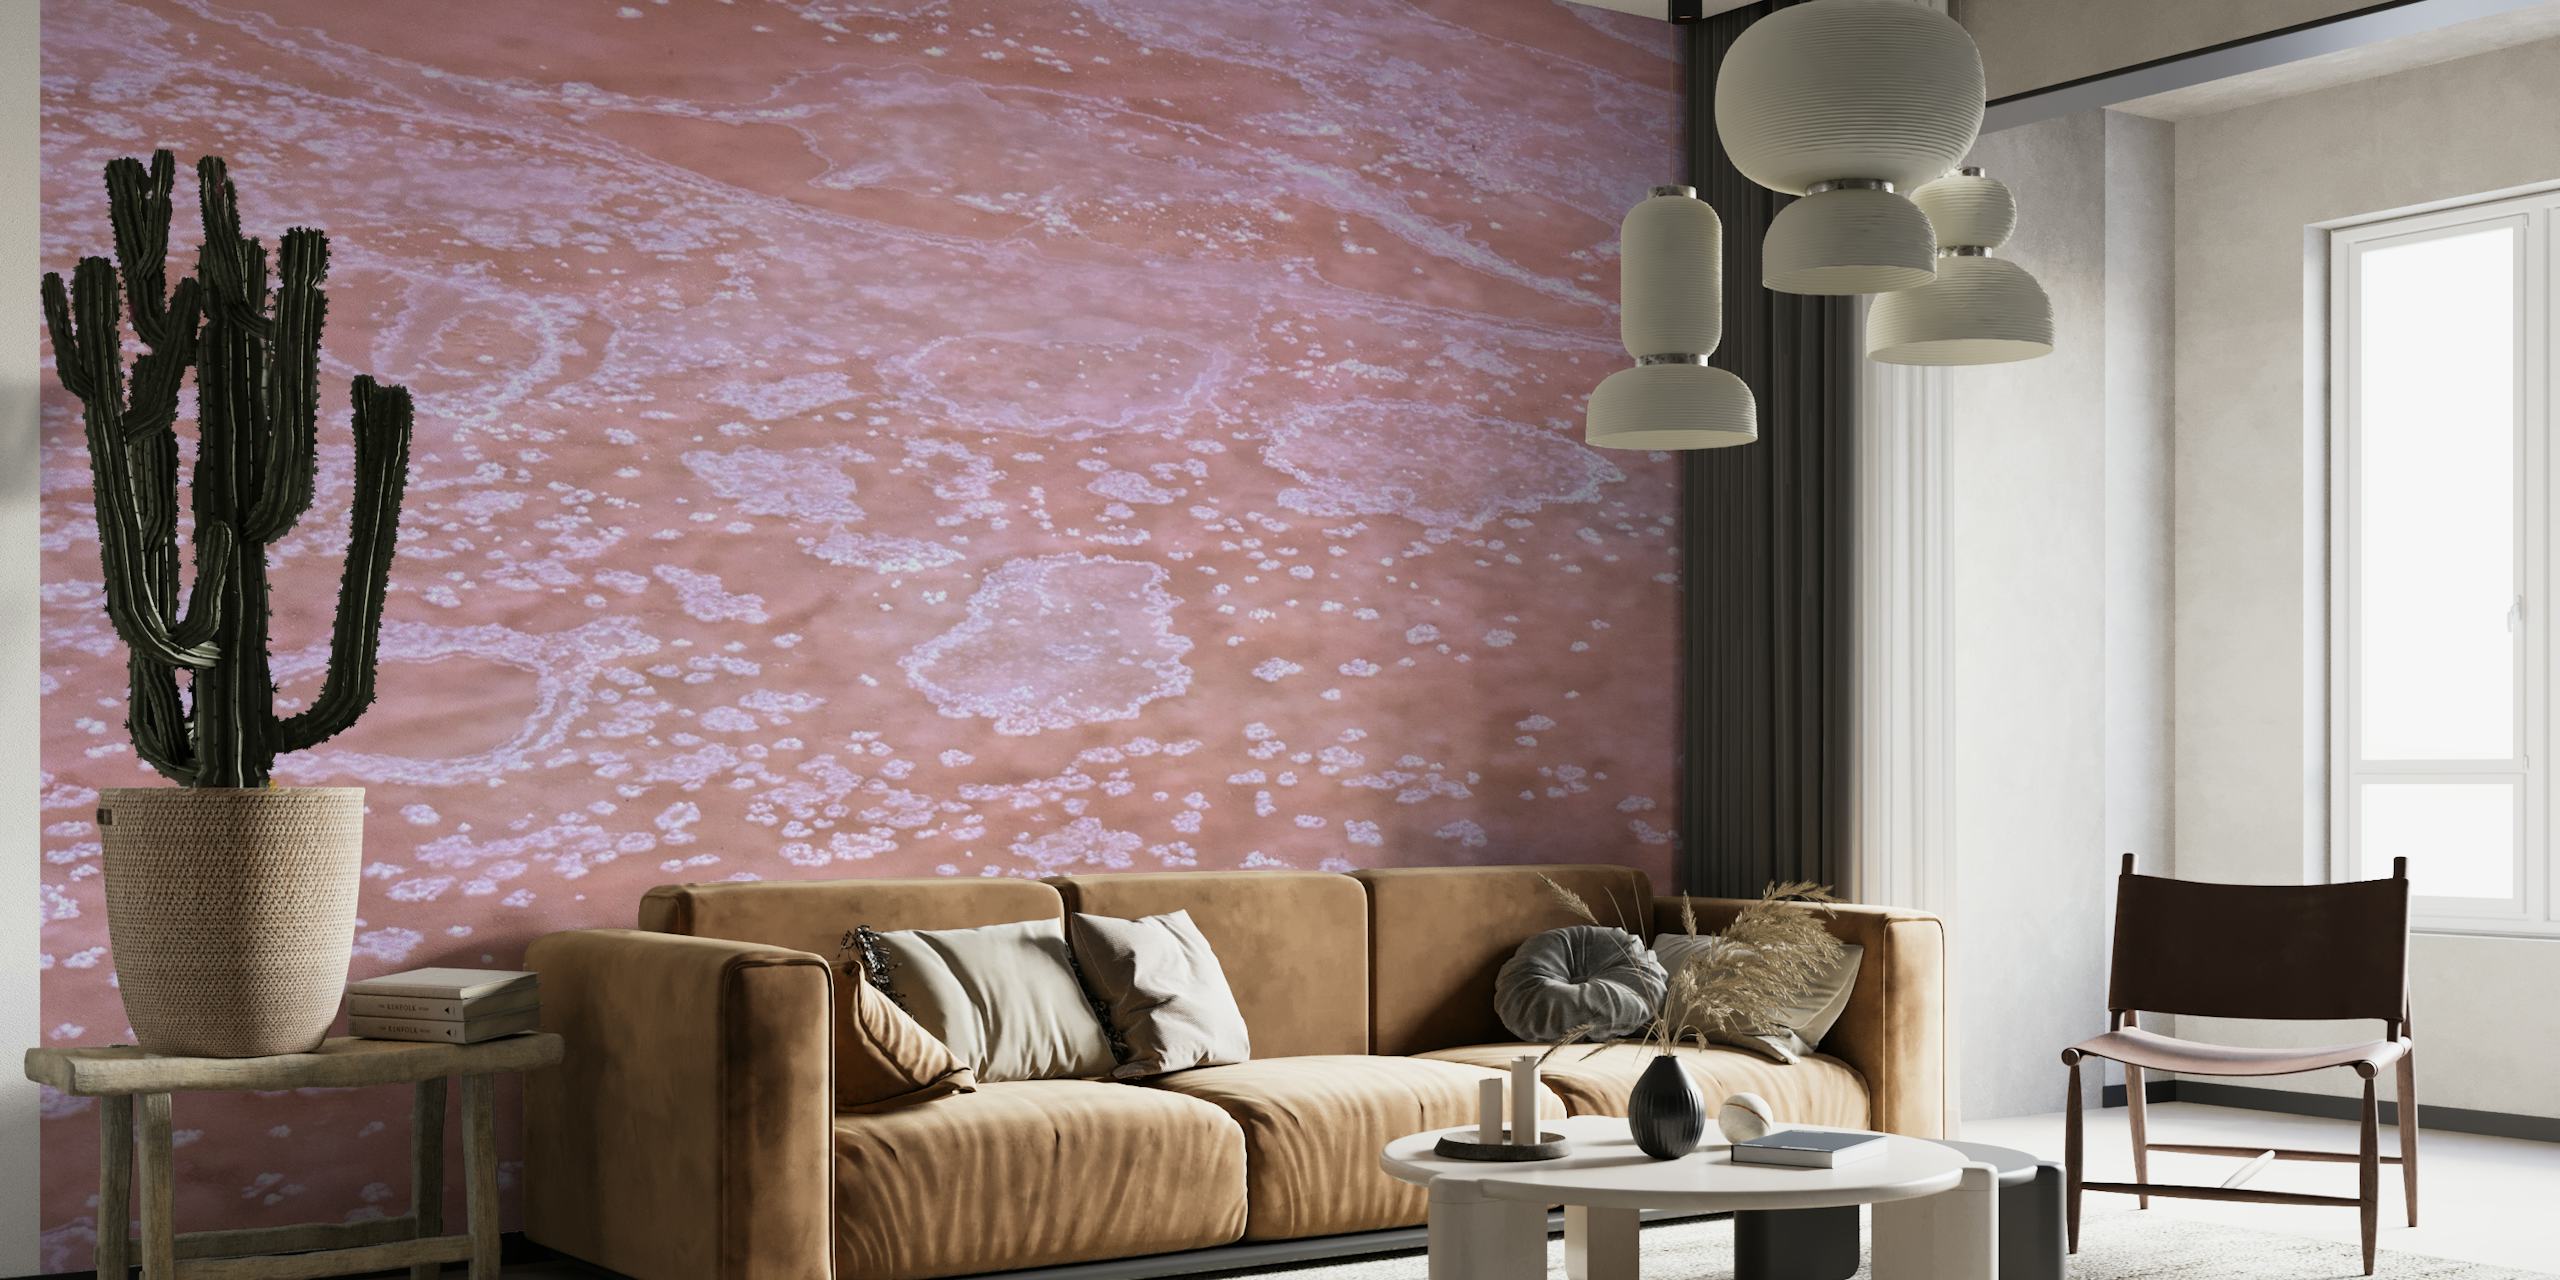 Wall mural of crystallized salt patterns in warm pink tones